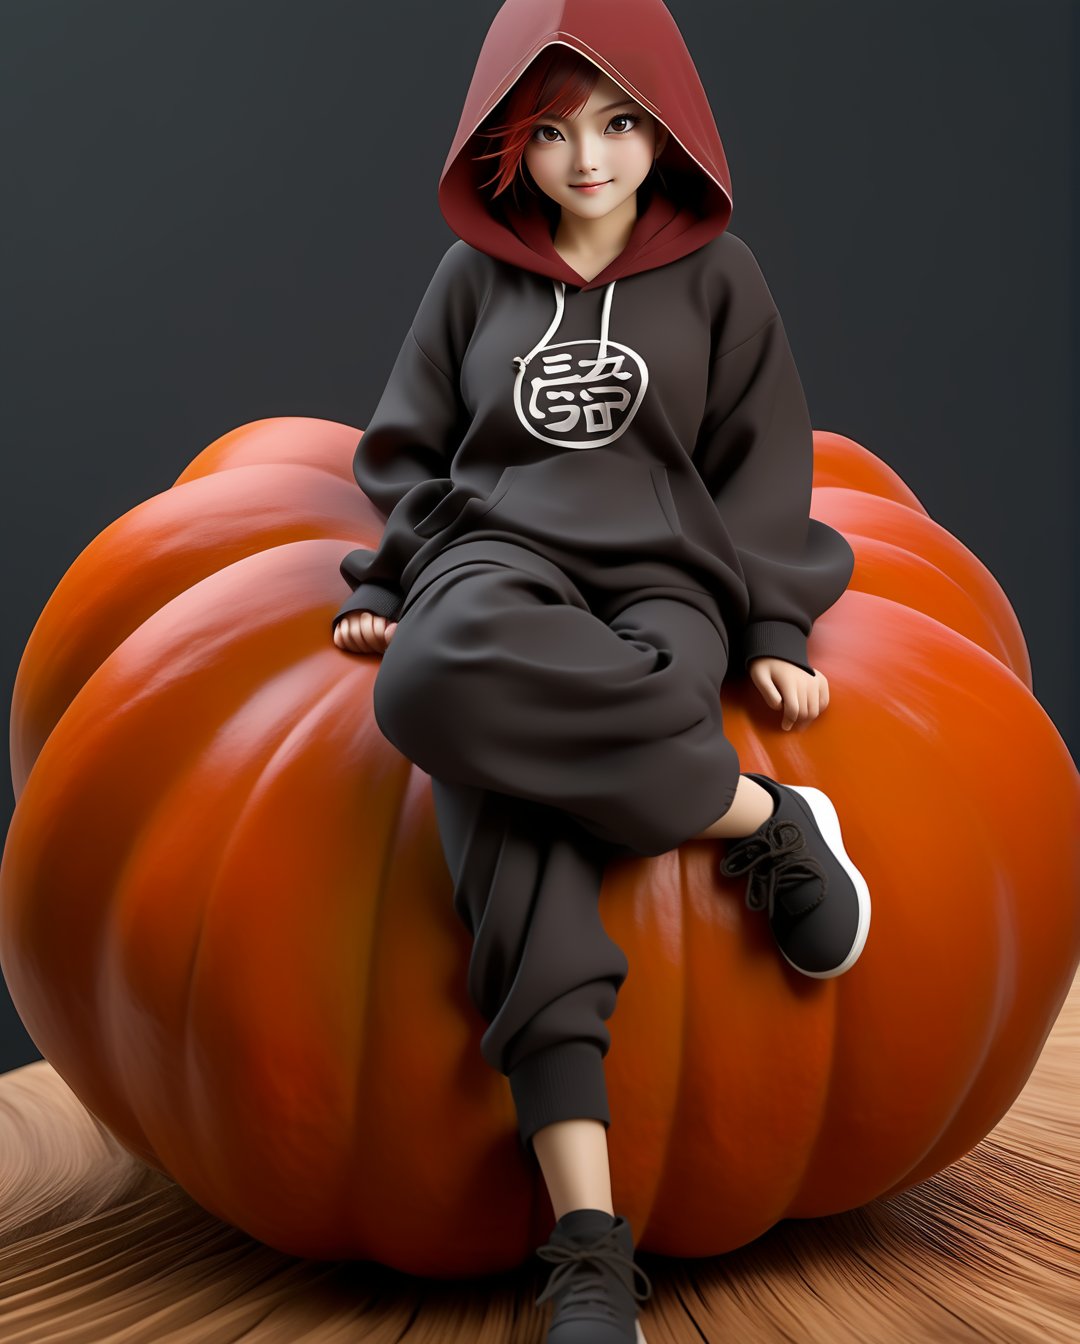 Happy gaara,女孩,旗袍,Dream, 10 year cute boy on a Red-brown gourd on his back with a black outfit and dark eye makeup hoodie, in the style of yuumei, realistic hyper - detailed rendering, yumihiko amano, zhang jingna, wiccan, trace monotone, rtx on ,細緻的背景,indian boy, various poses 